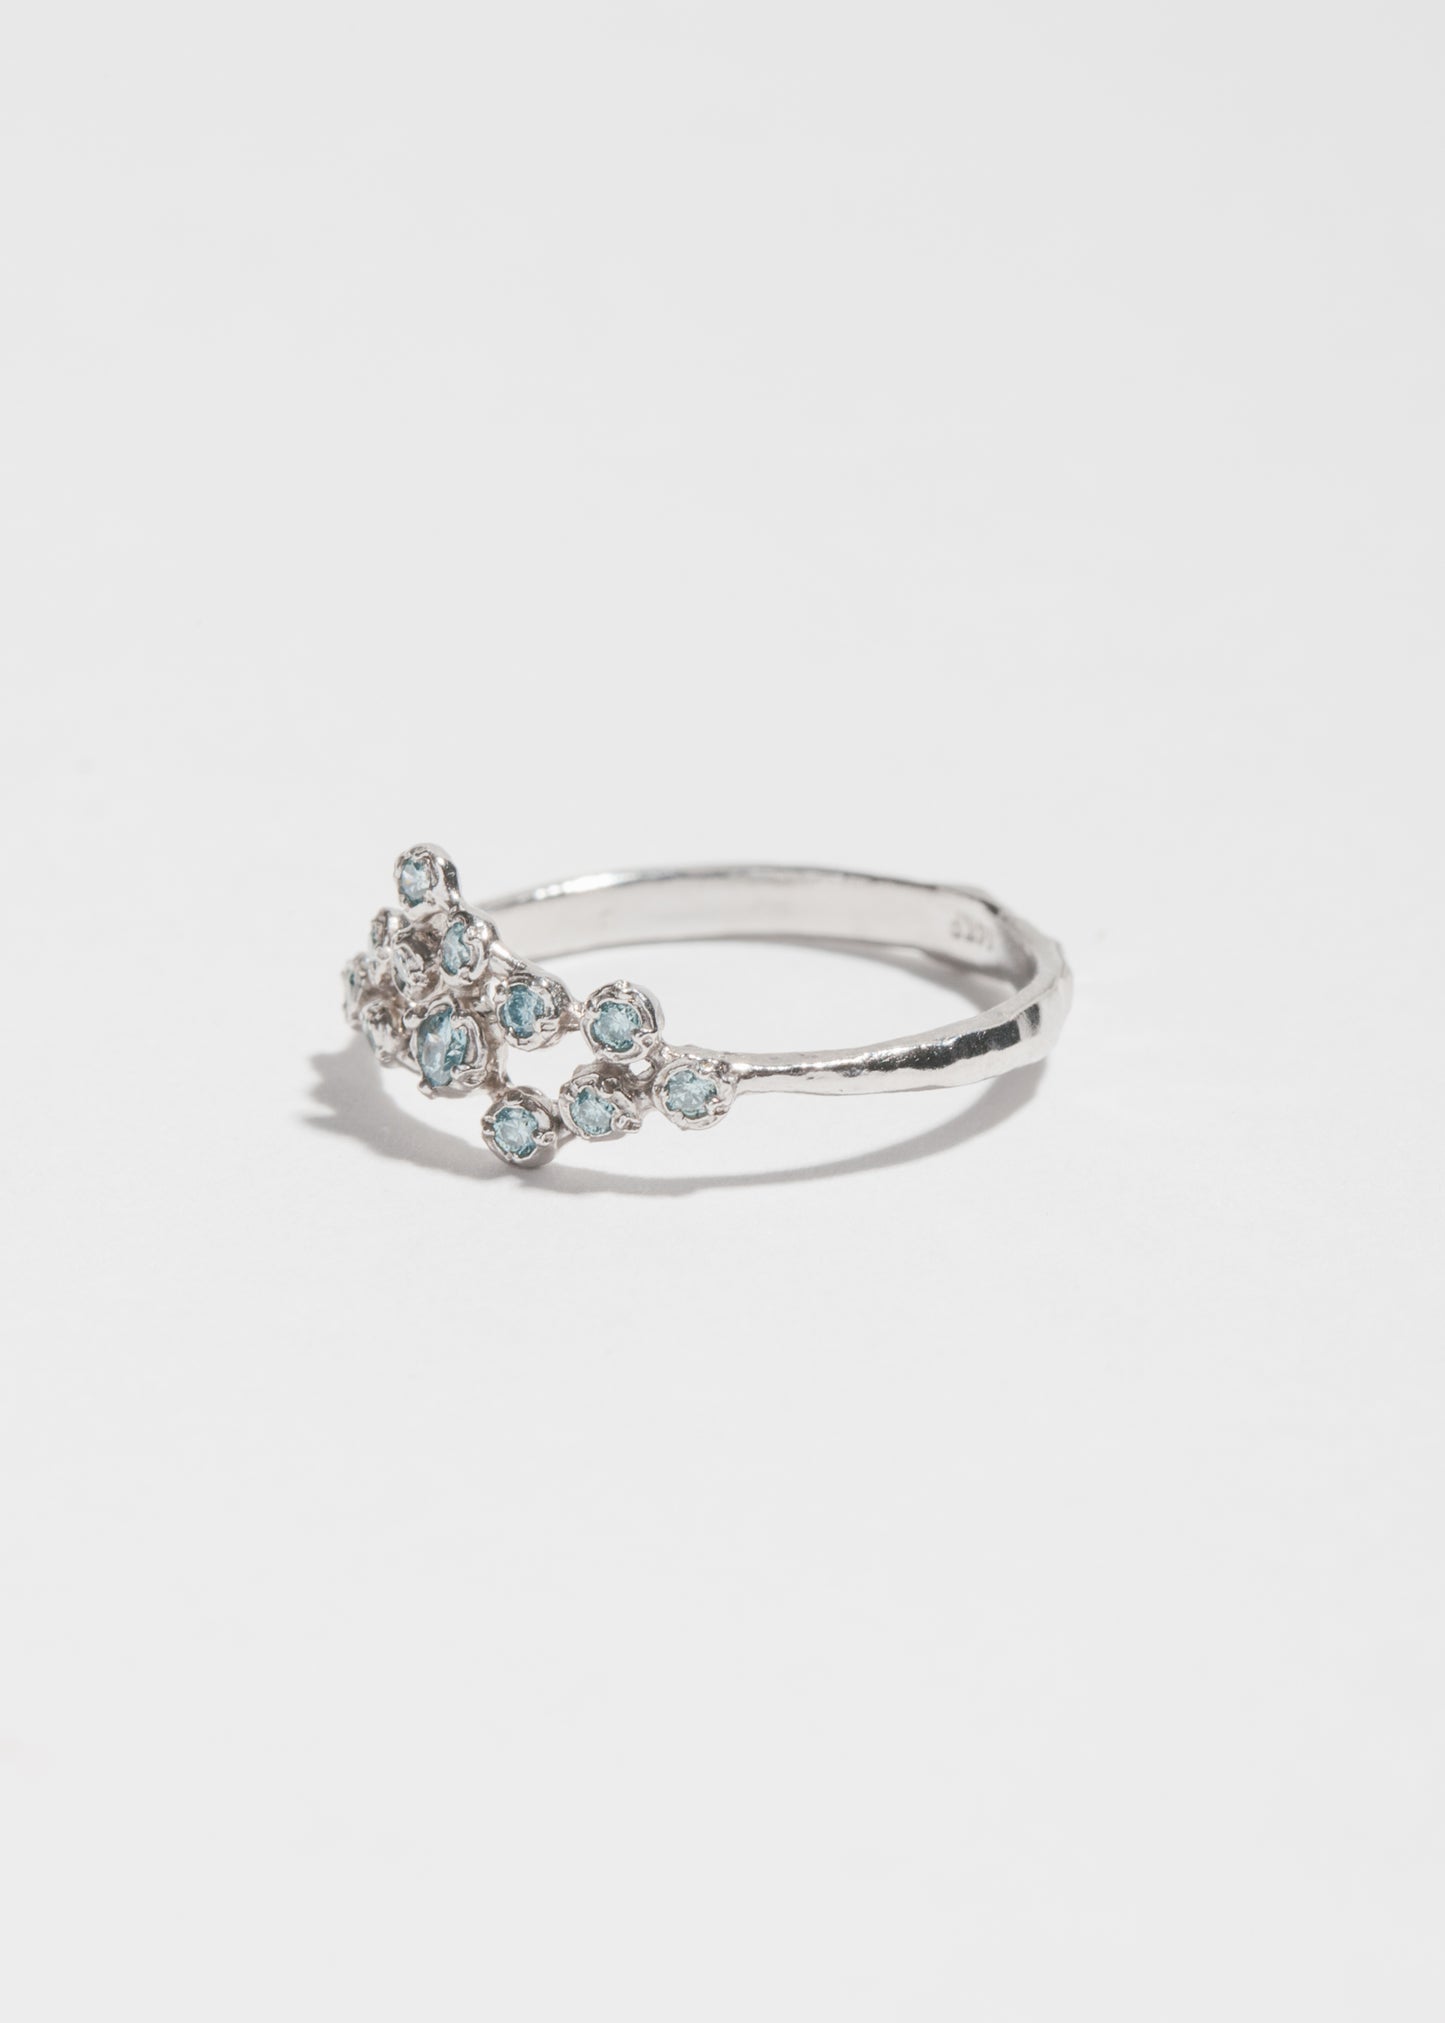 14k White Gold and Blue 12 Diamond Cluster Ring